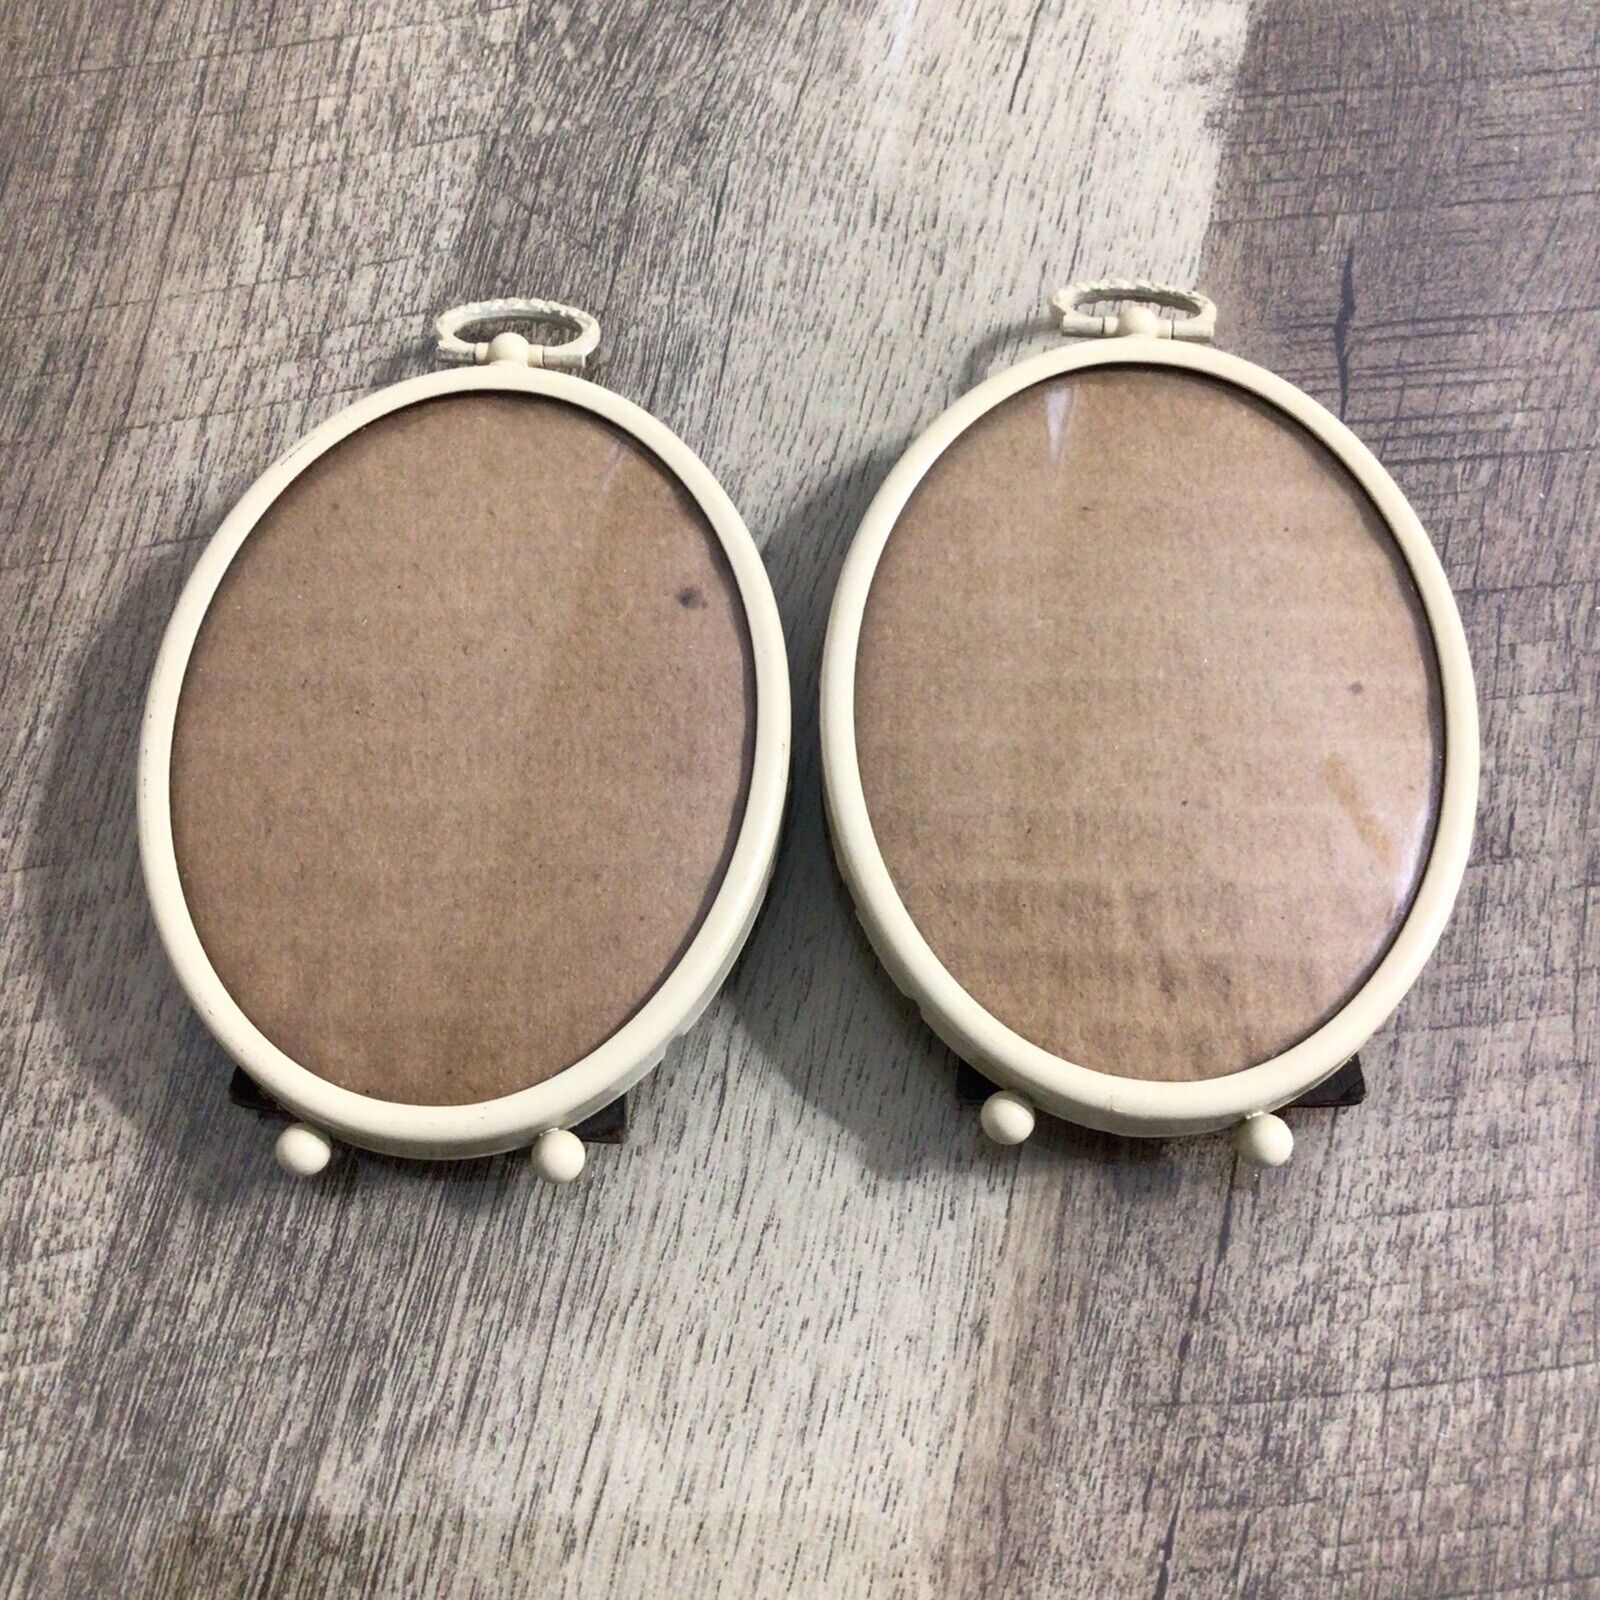 Vintage Small Metal Oval Picture Frames Convex / Bubble Glass Set of 2